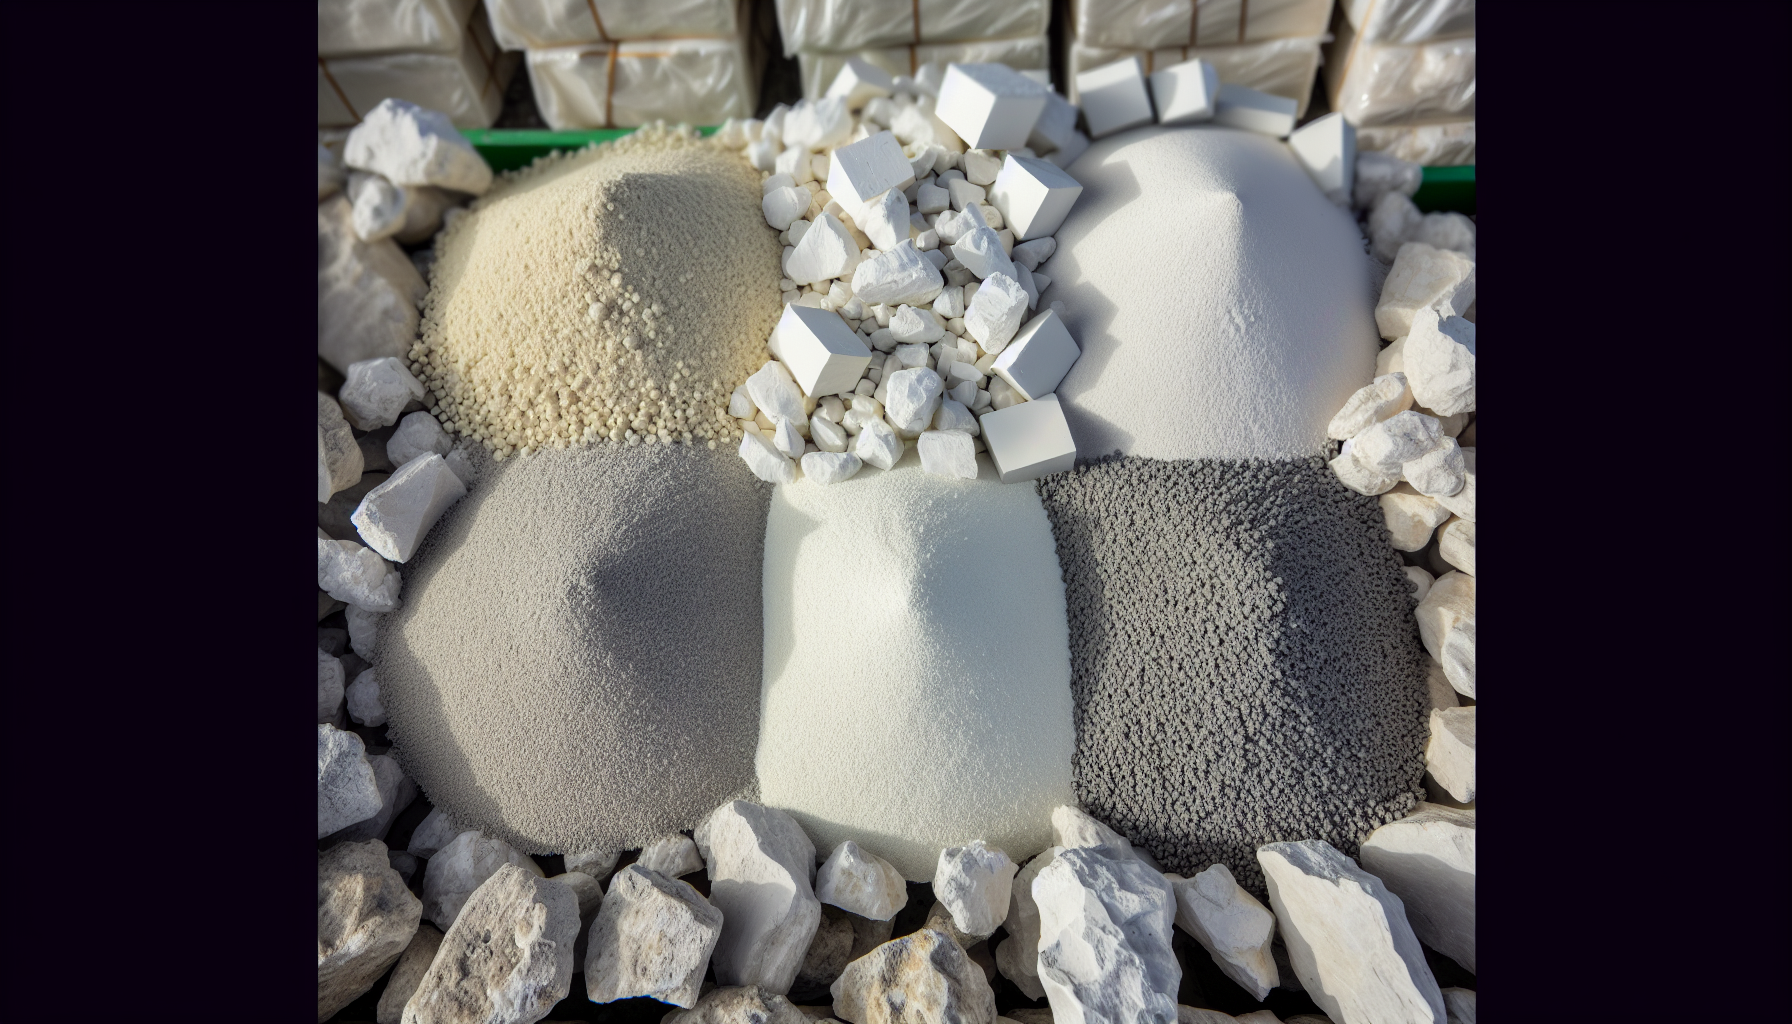 Raw materials for Portland cement production